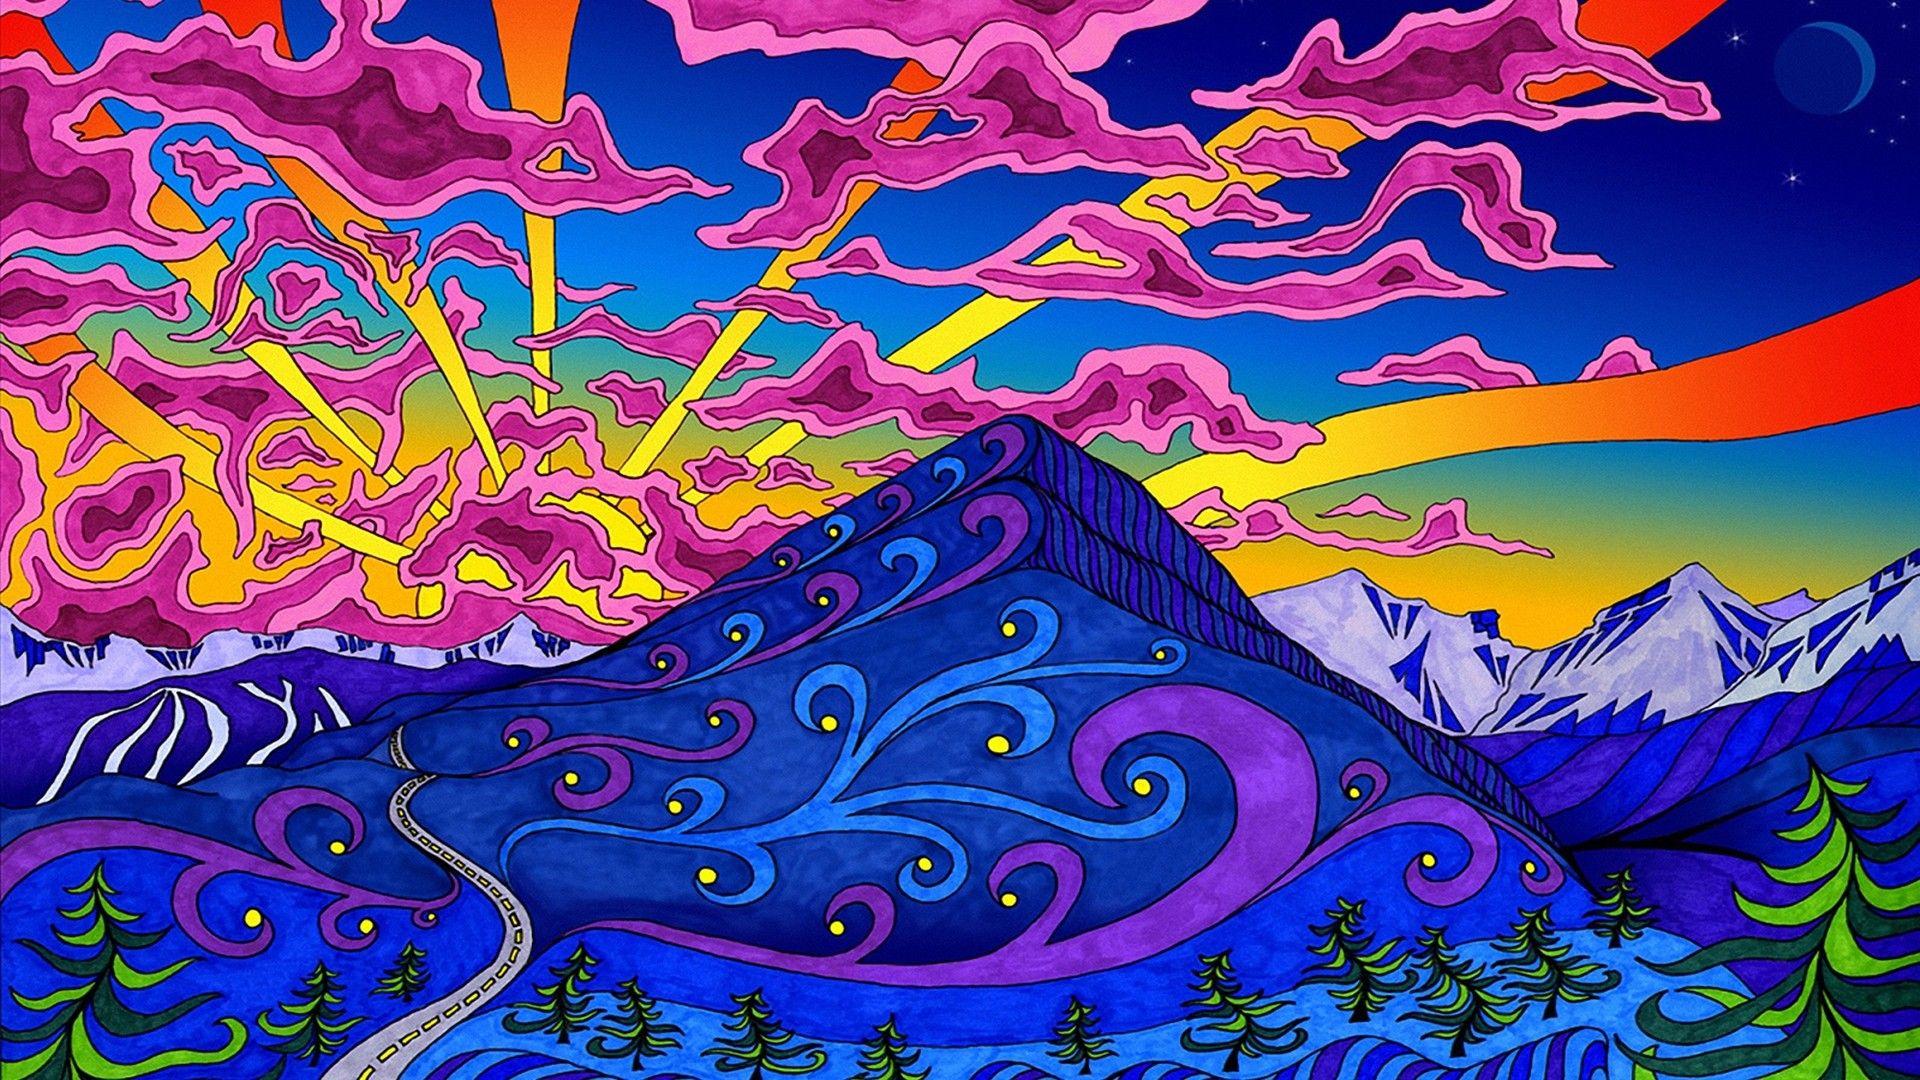 mountains, landscapes, psychedelic, artwork, colors :: Wallpapers.